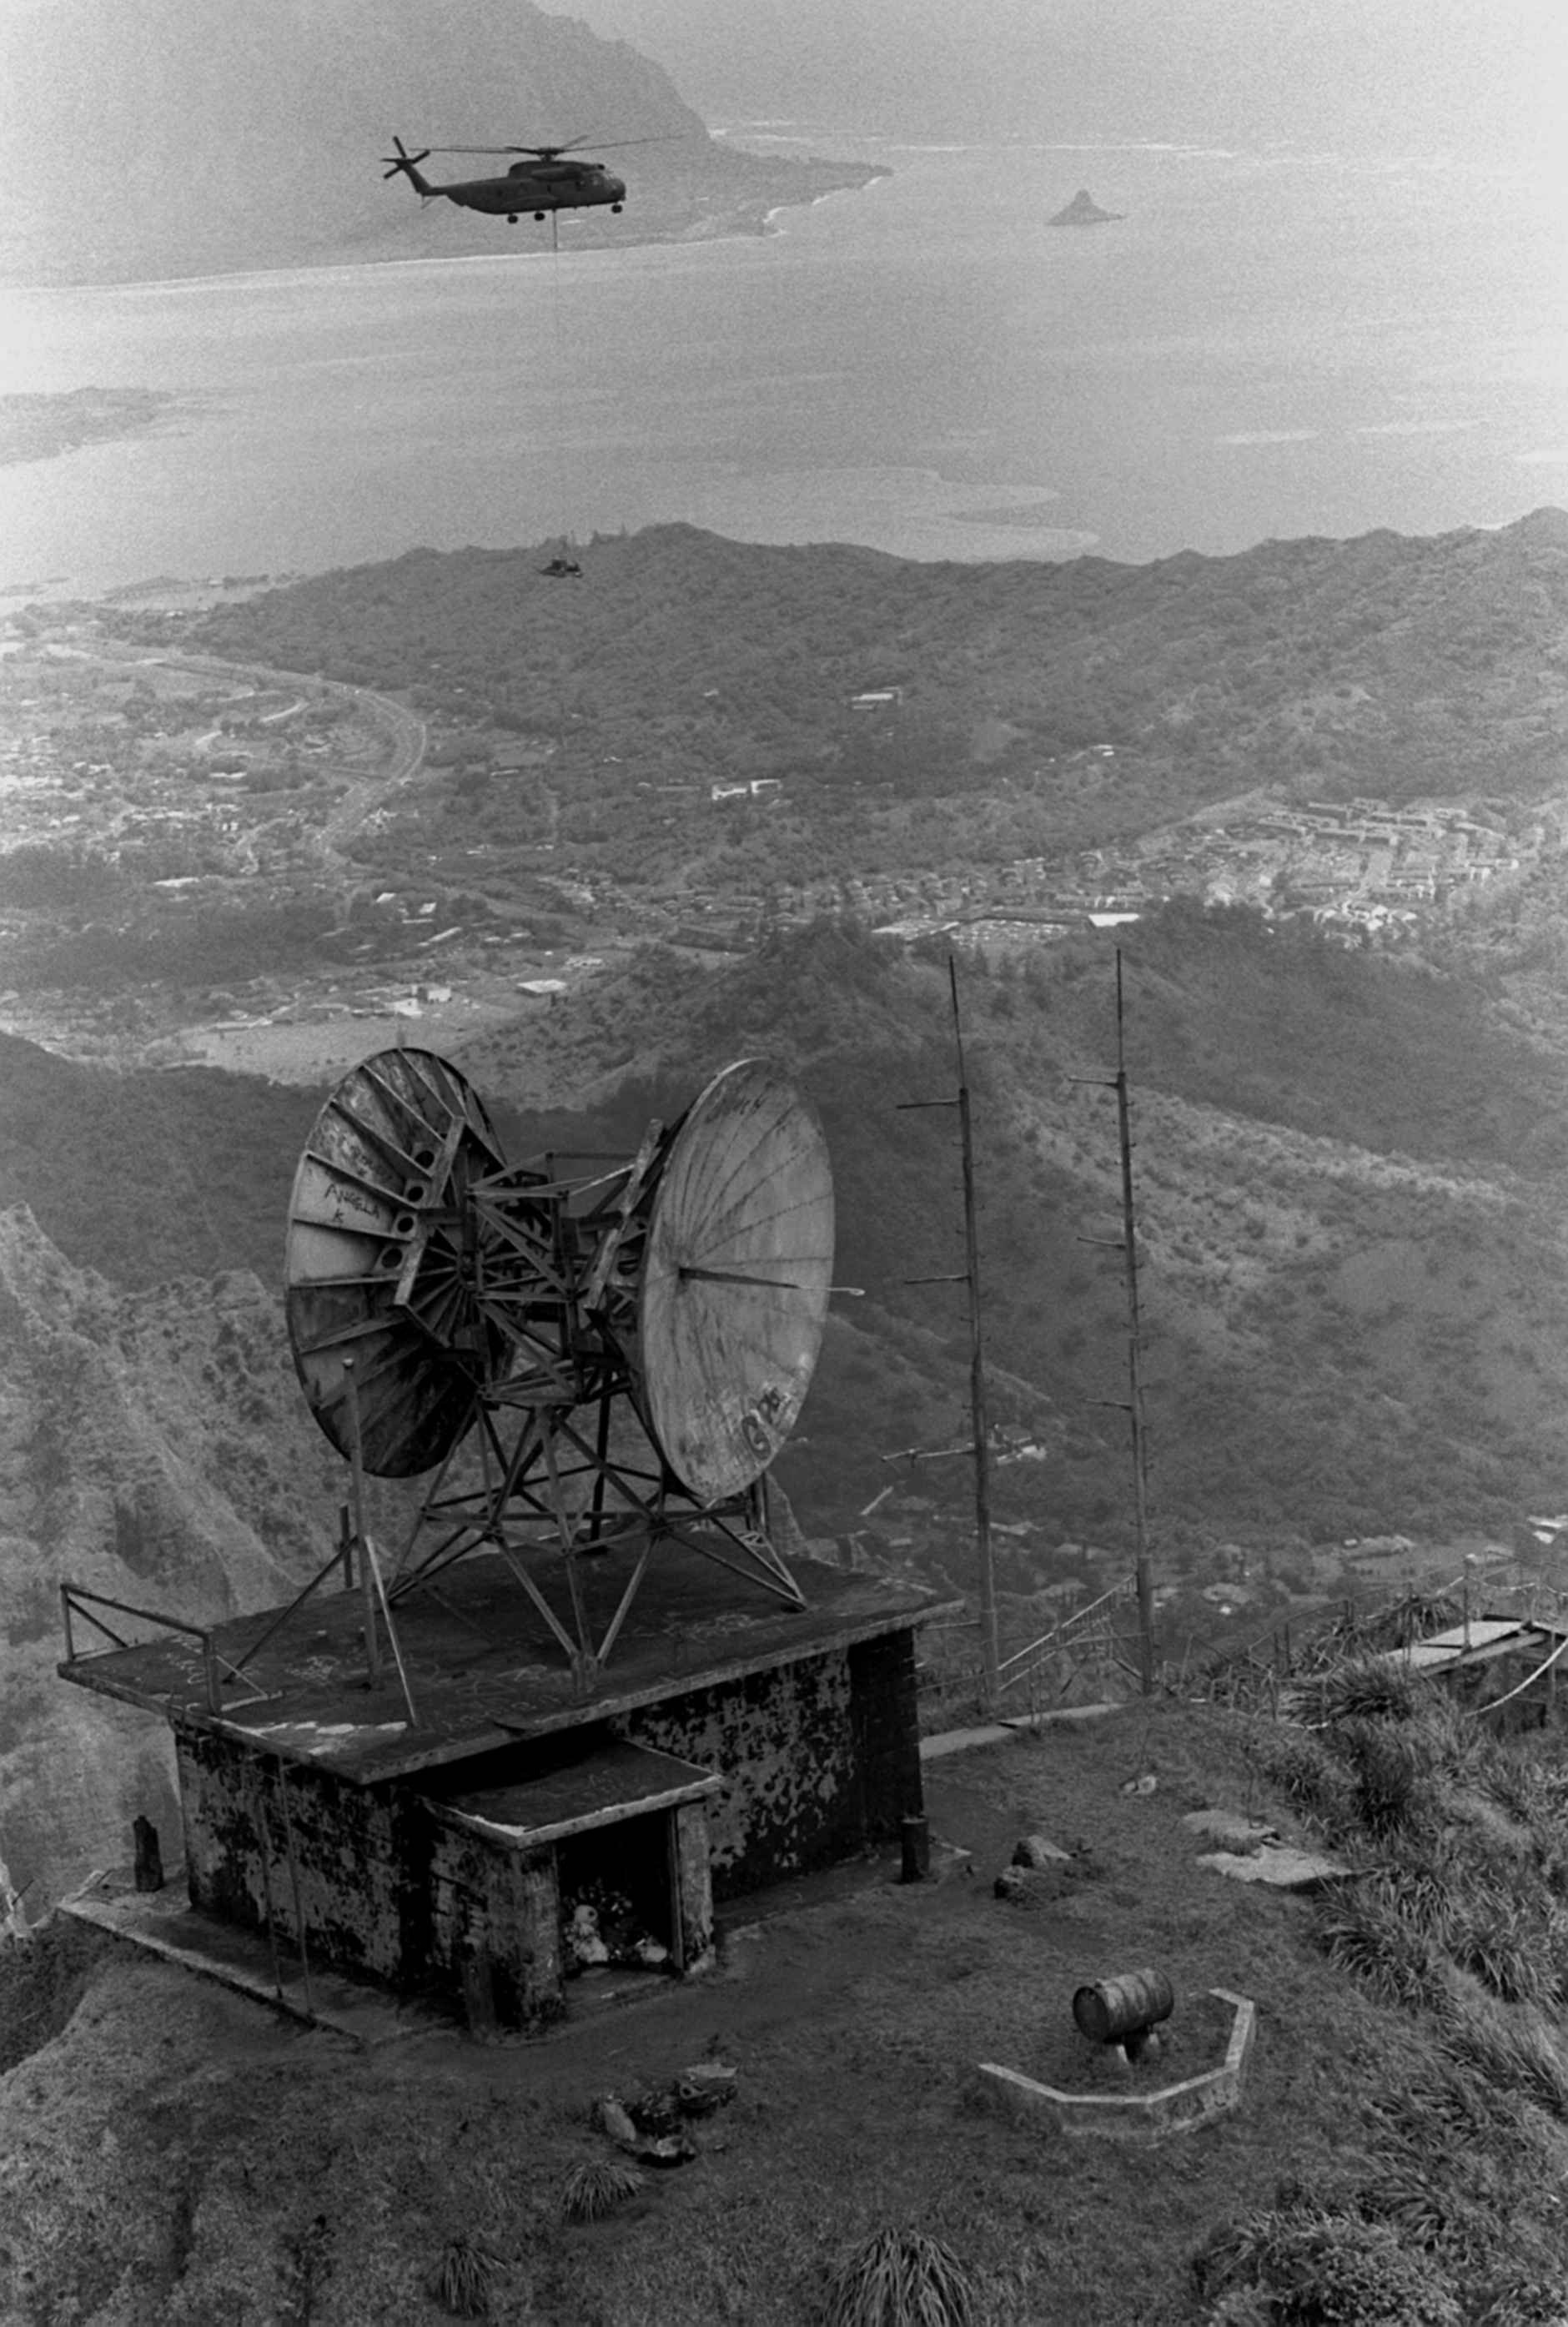 Kaneohe Omega Transmitter with CH-53 1987